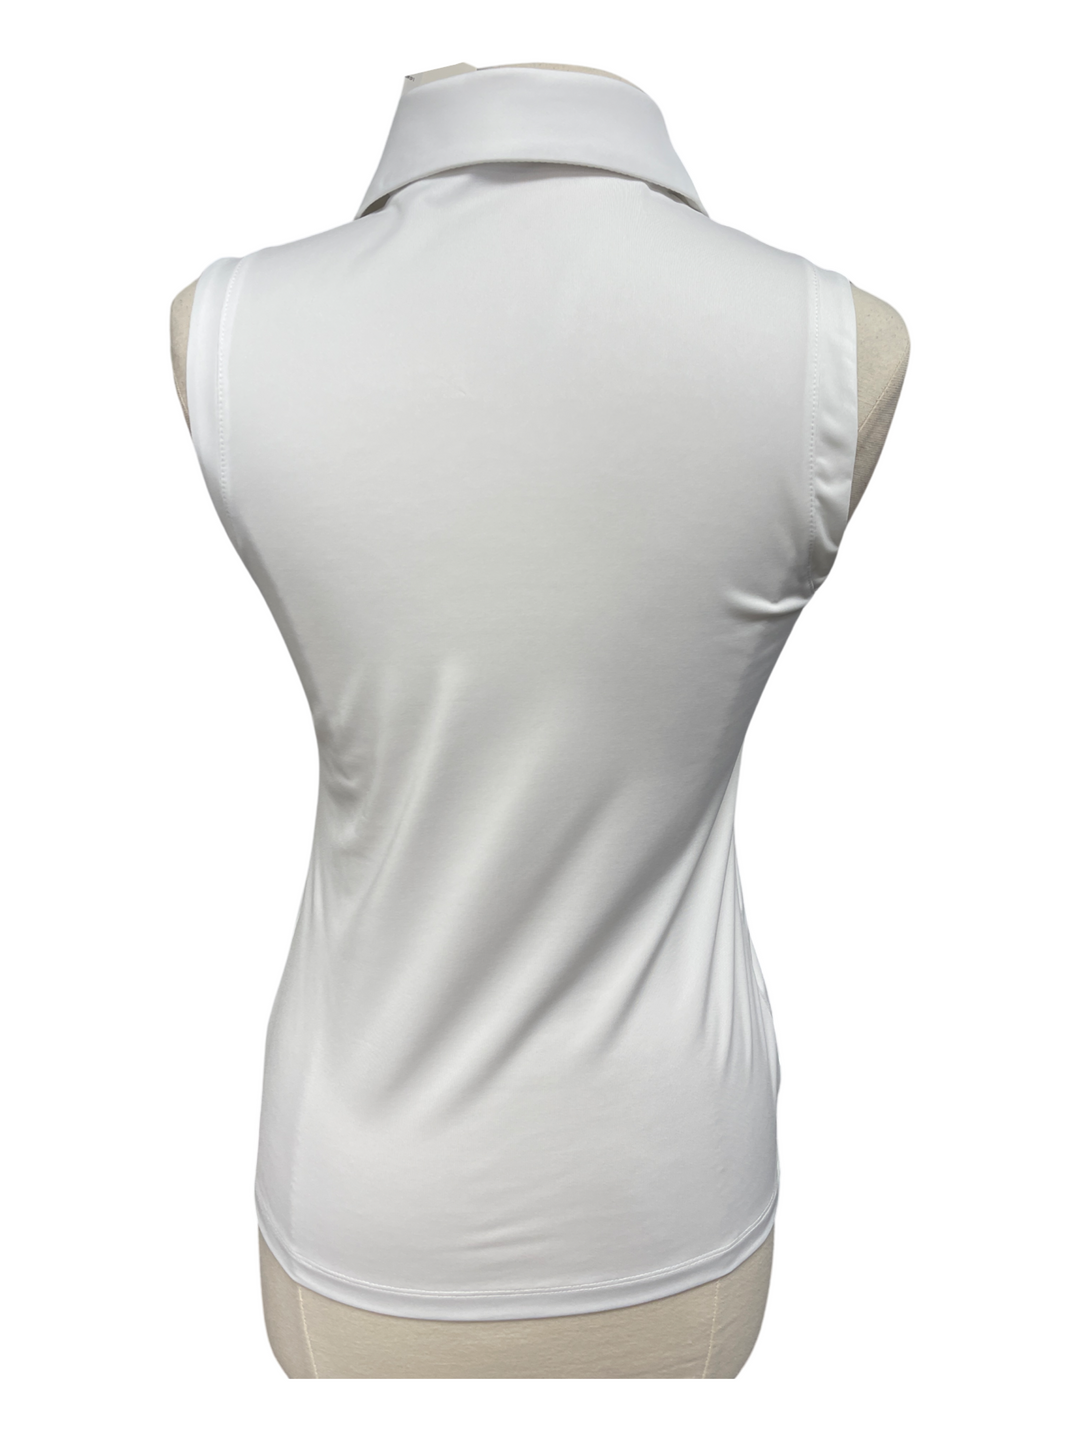 Dunning Golf White Player Jersey Sleeveless Polo- Small